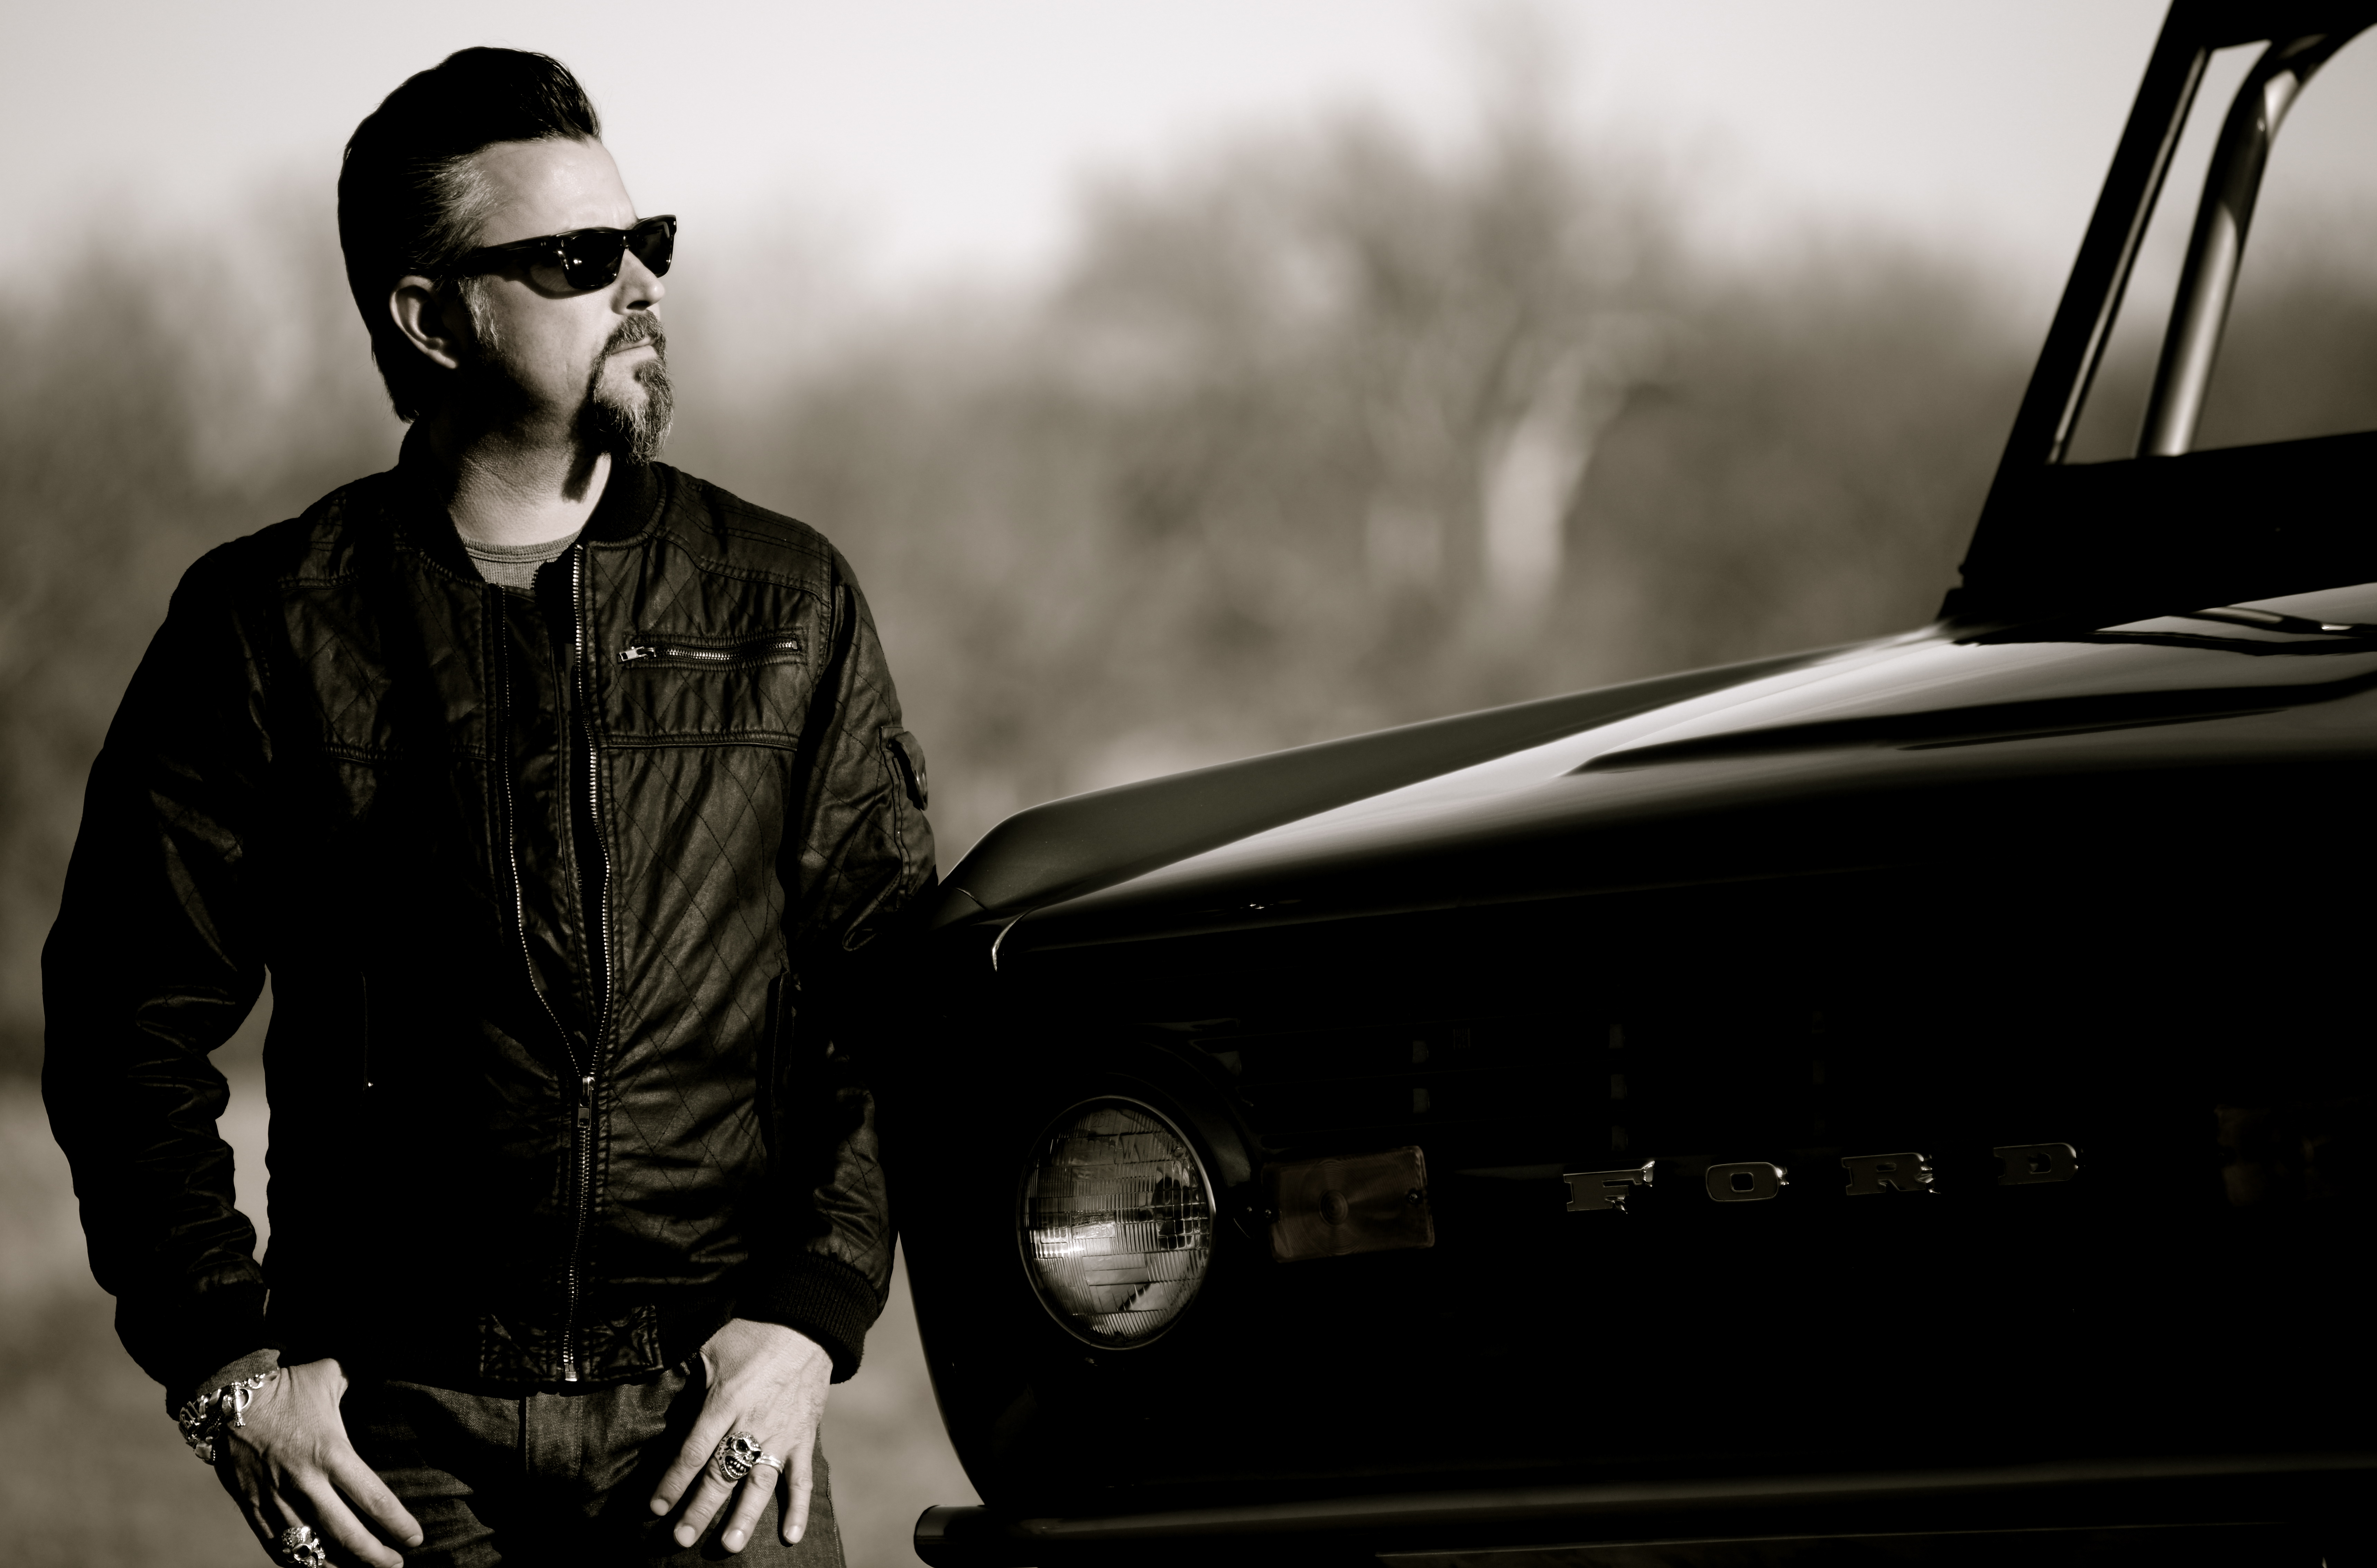 Richard Rawlings, owner of Gas Monkey Garage, while filming Discovery's Fast N' Loud